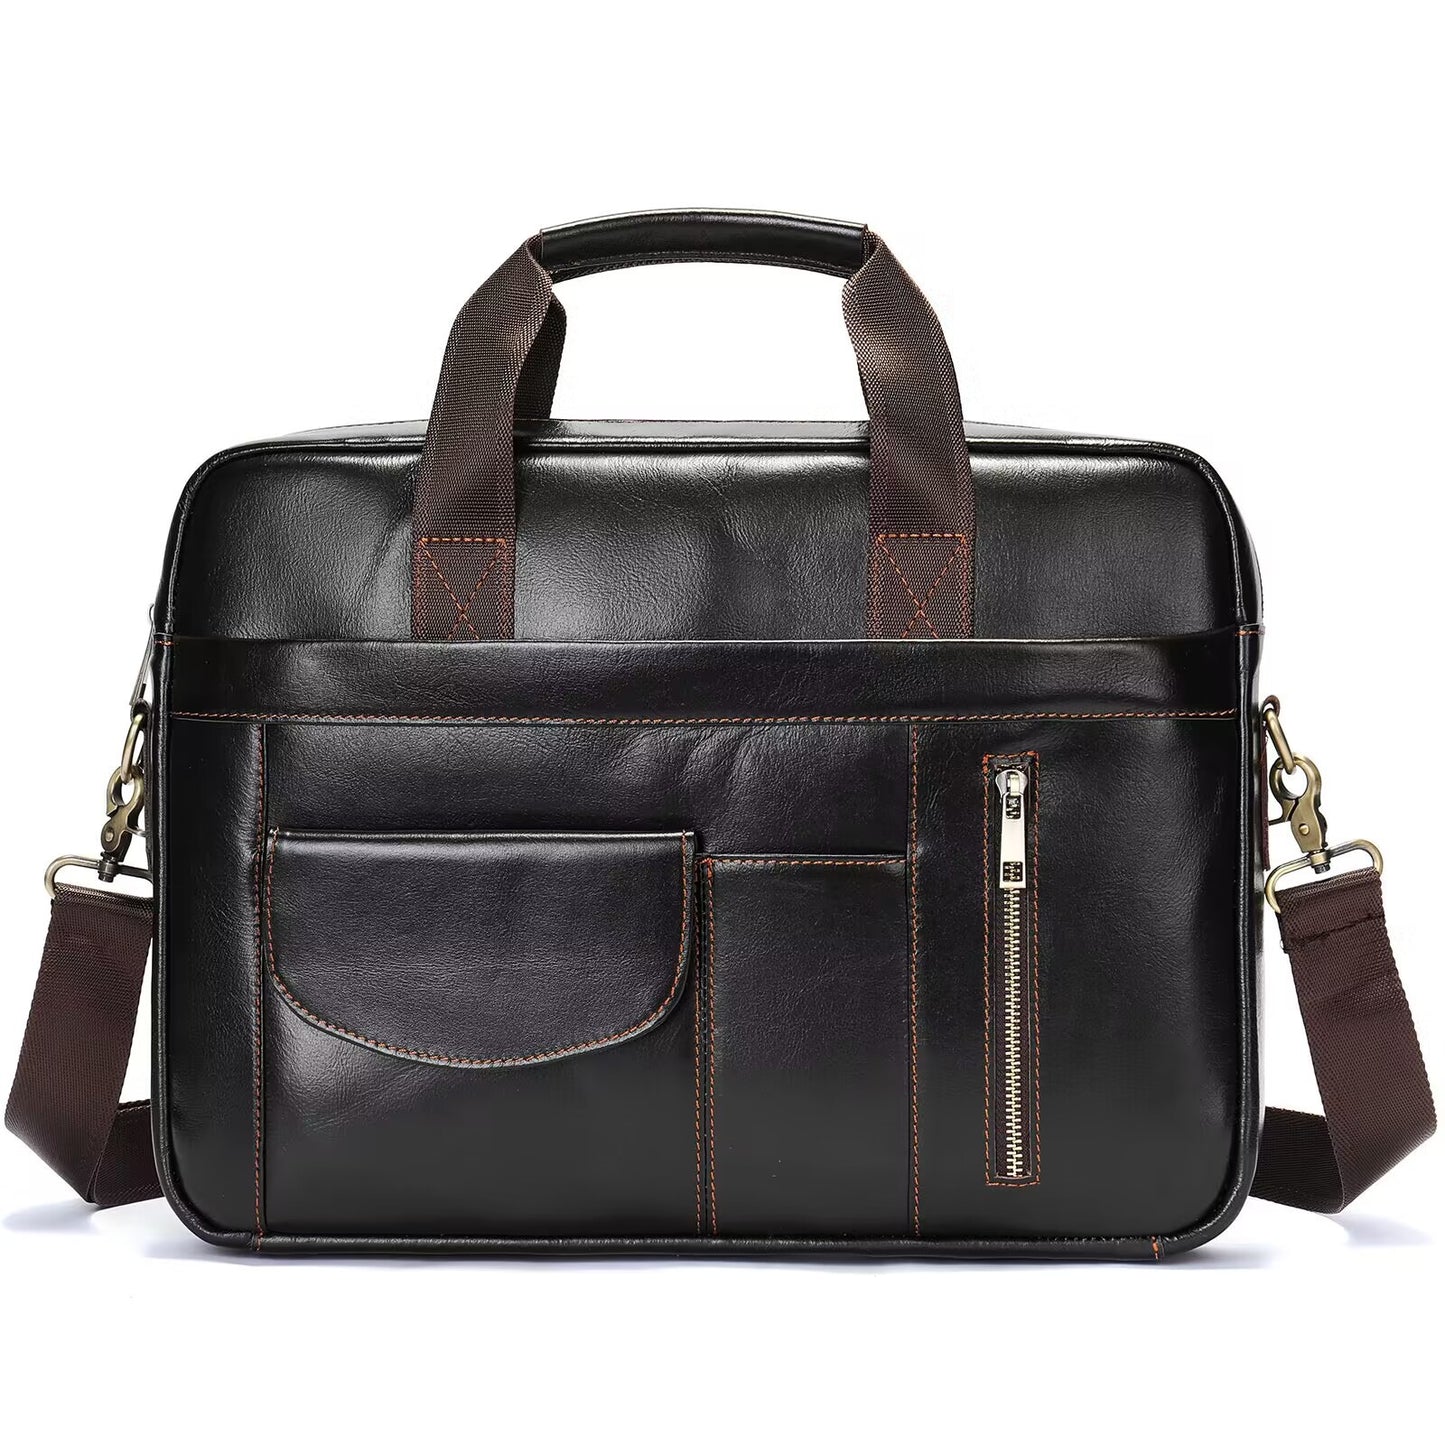 Men's Leather Business Briefcase